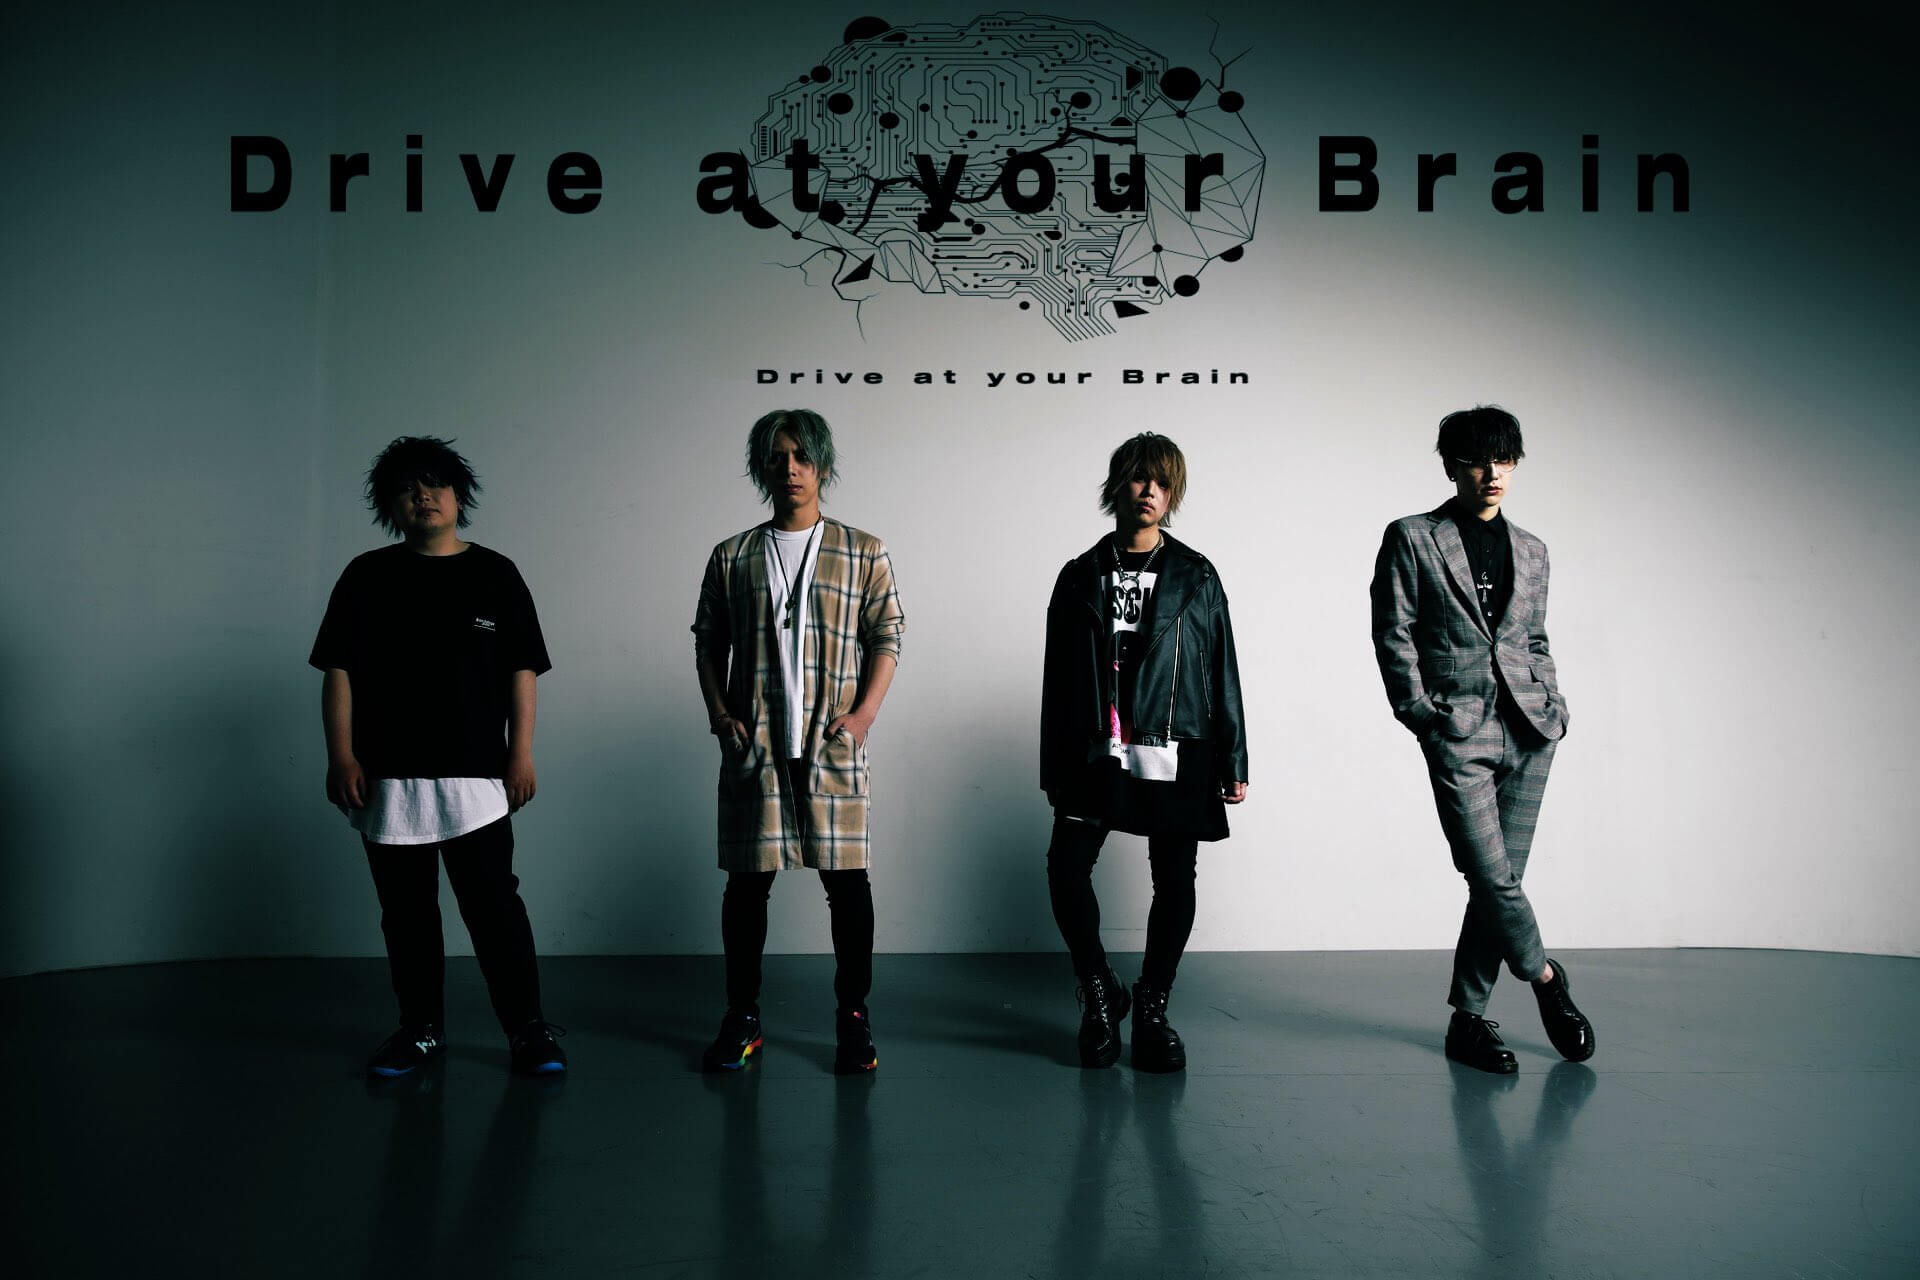 Drive at your Brain will disband